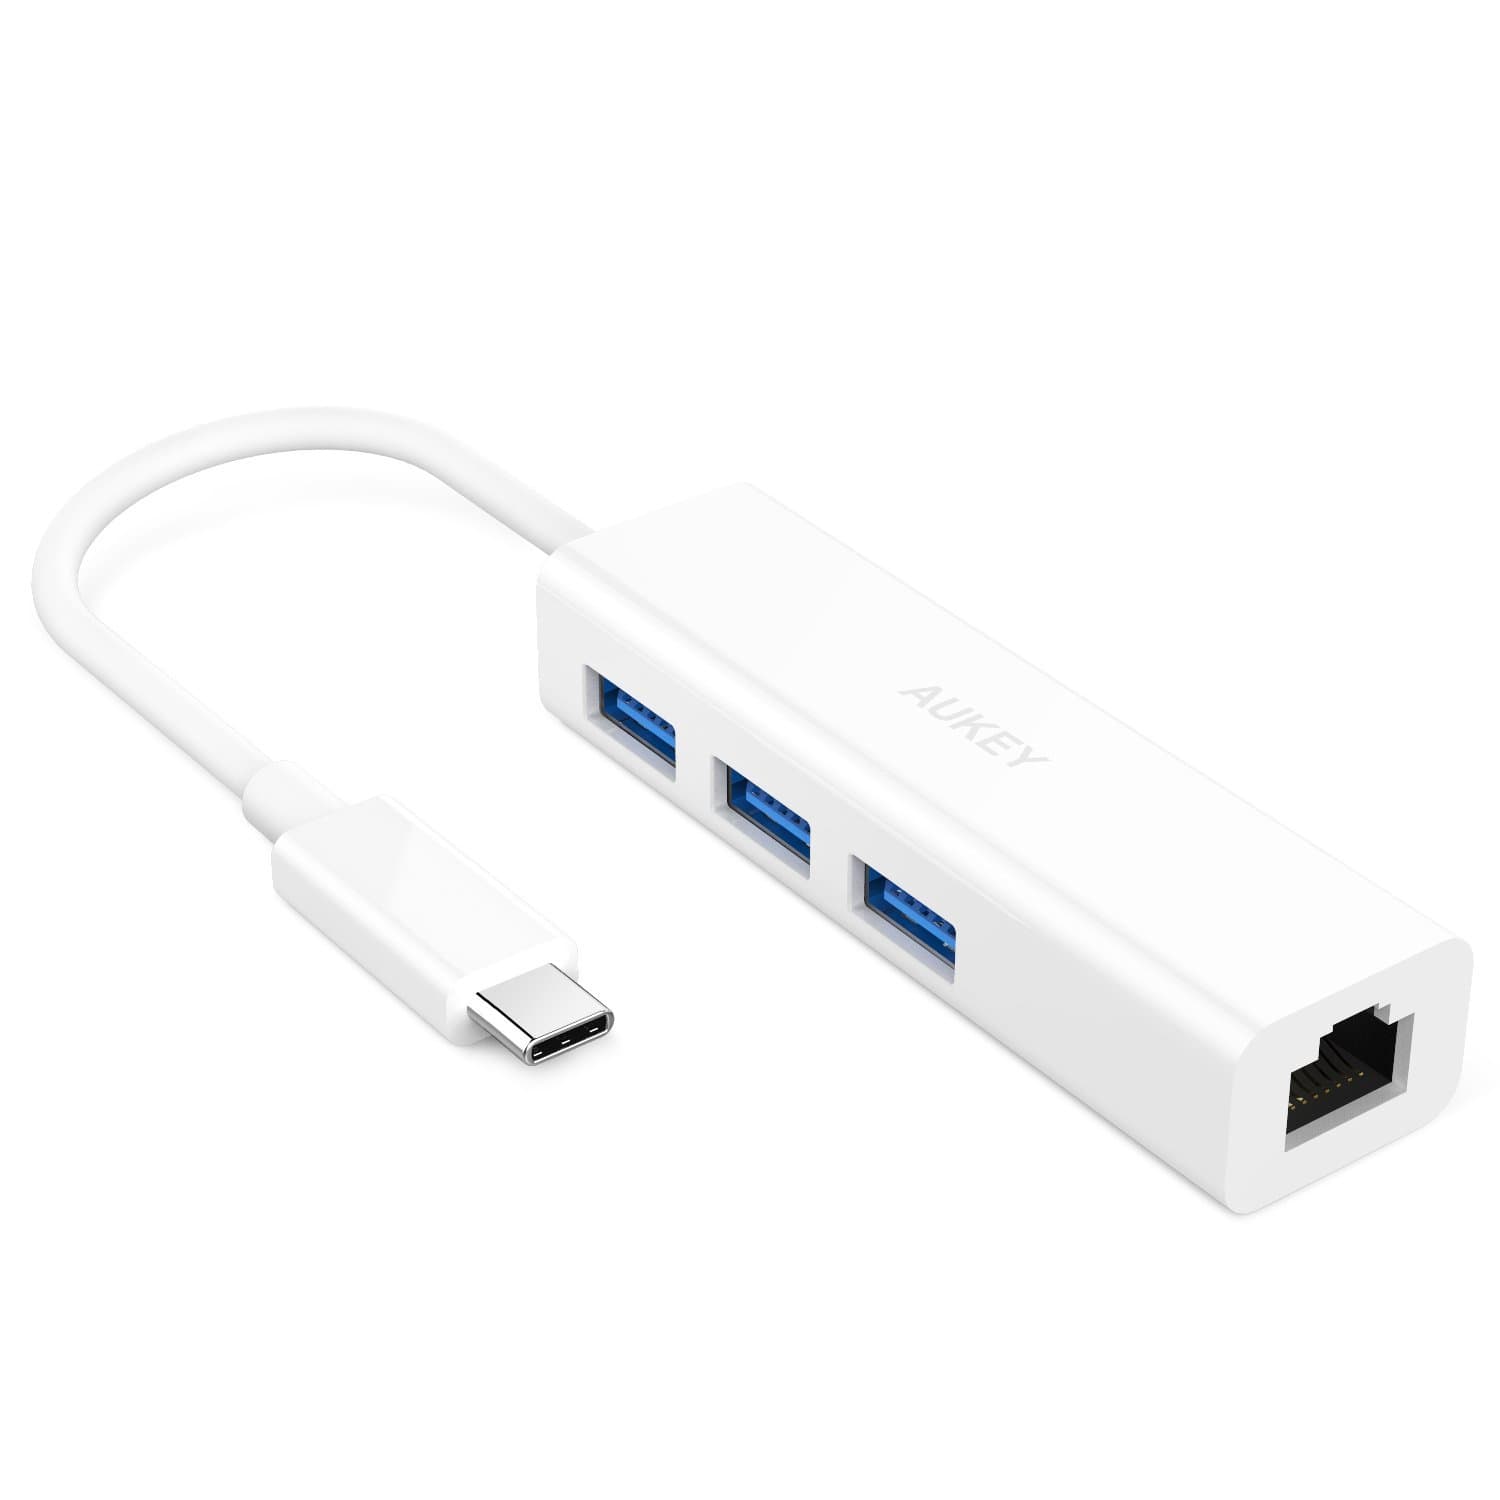 AUKEY CB-C17 USB C To 3 Ports USB 3.0 Hub With Gigabit Ethernet Adapter - Aukey Malaysia Official Store